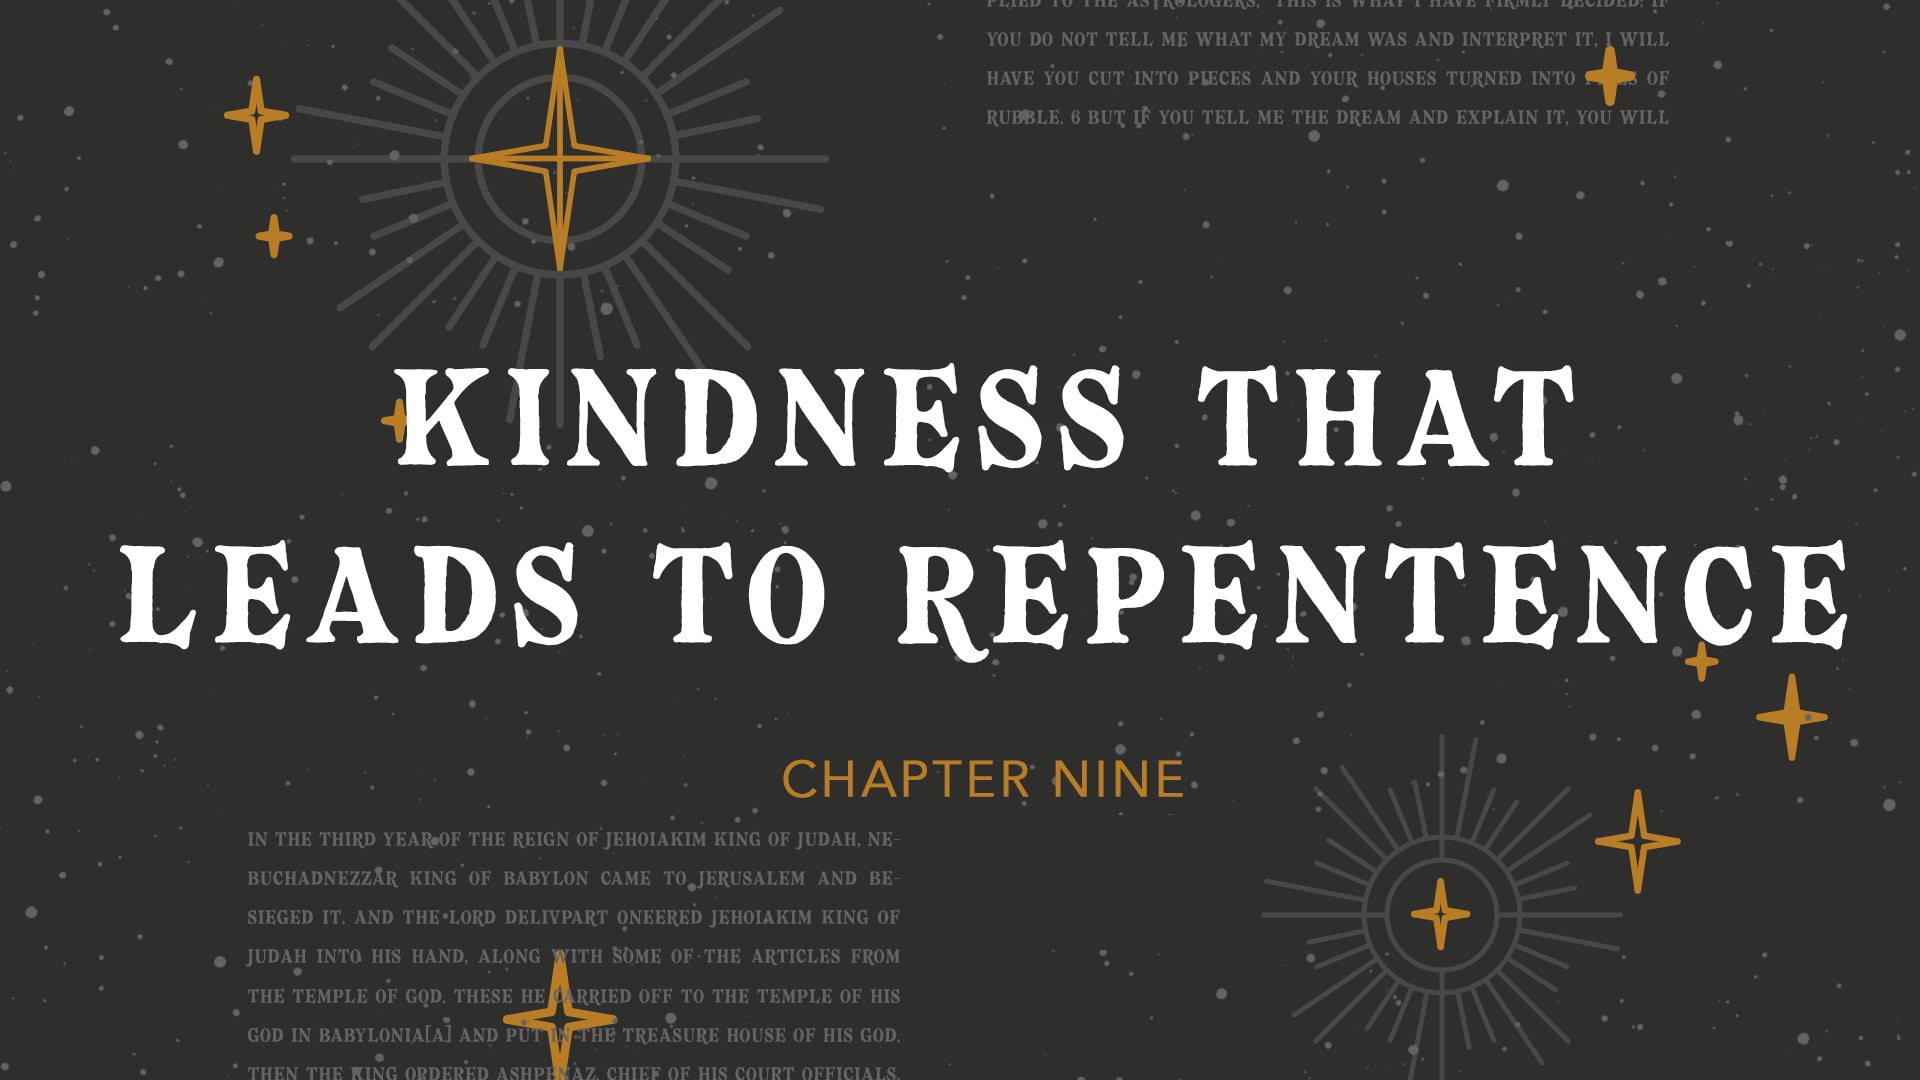 The Book of Daniel - Kindness That Leads to Repentance (Chapter Nine)